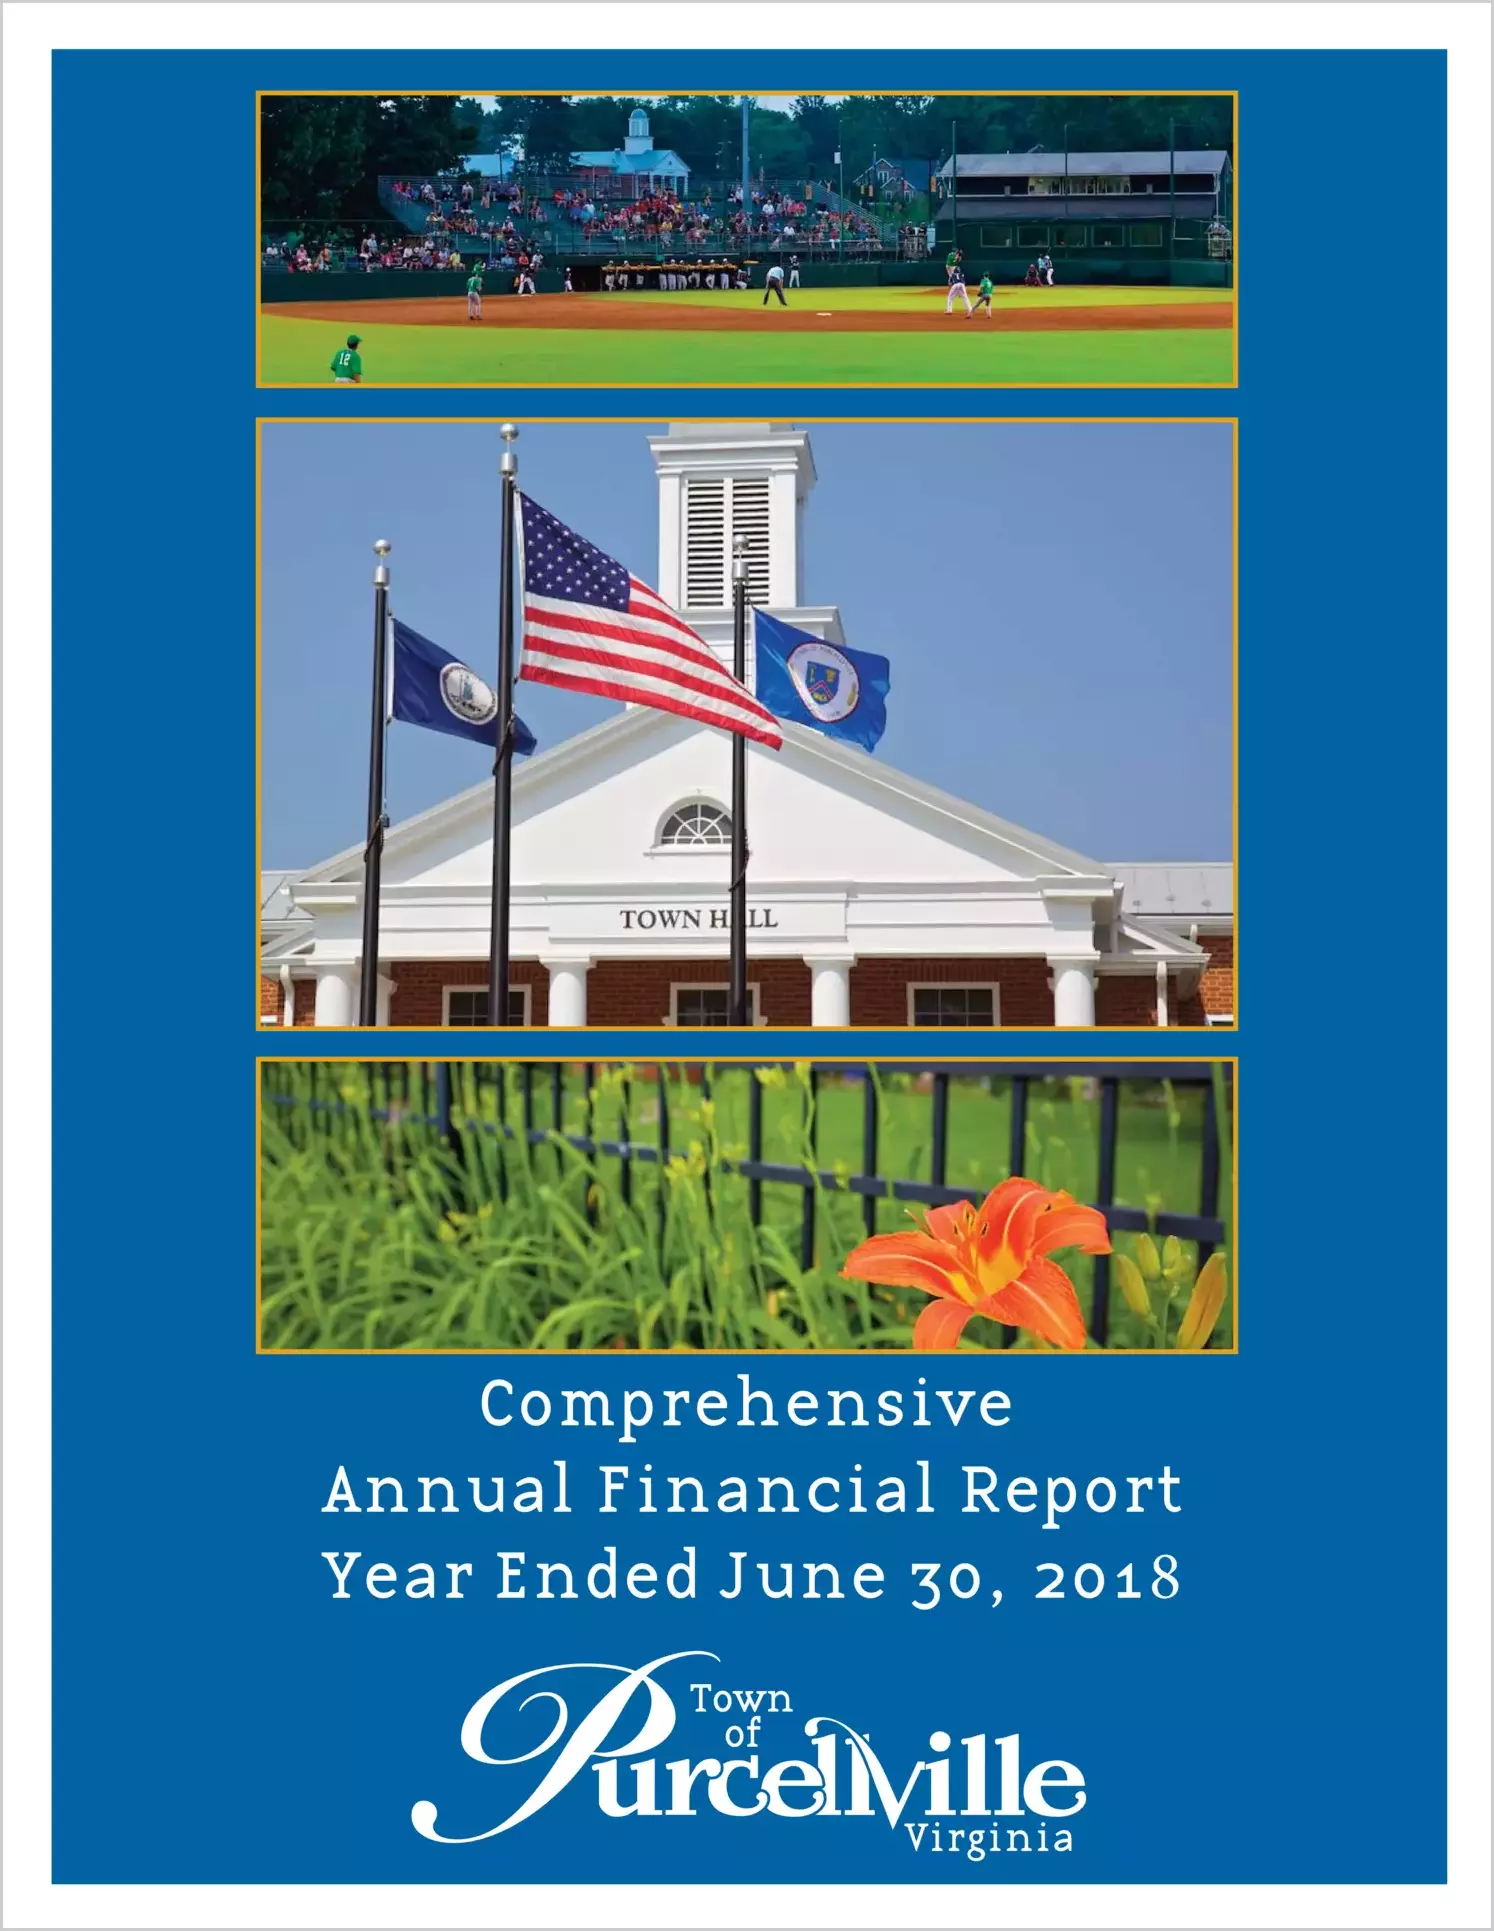 2018 Annual Financial Report for Town of Purcellville